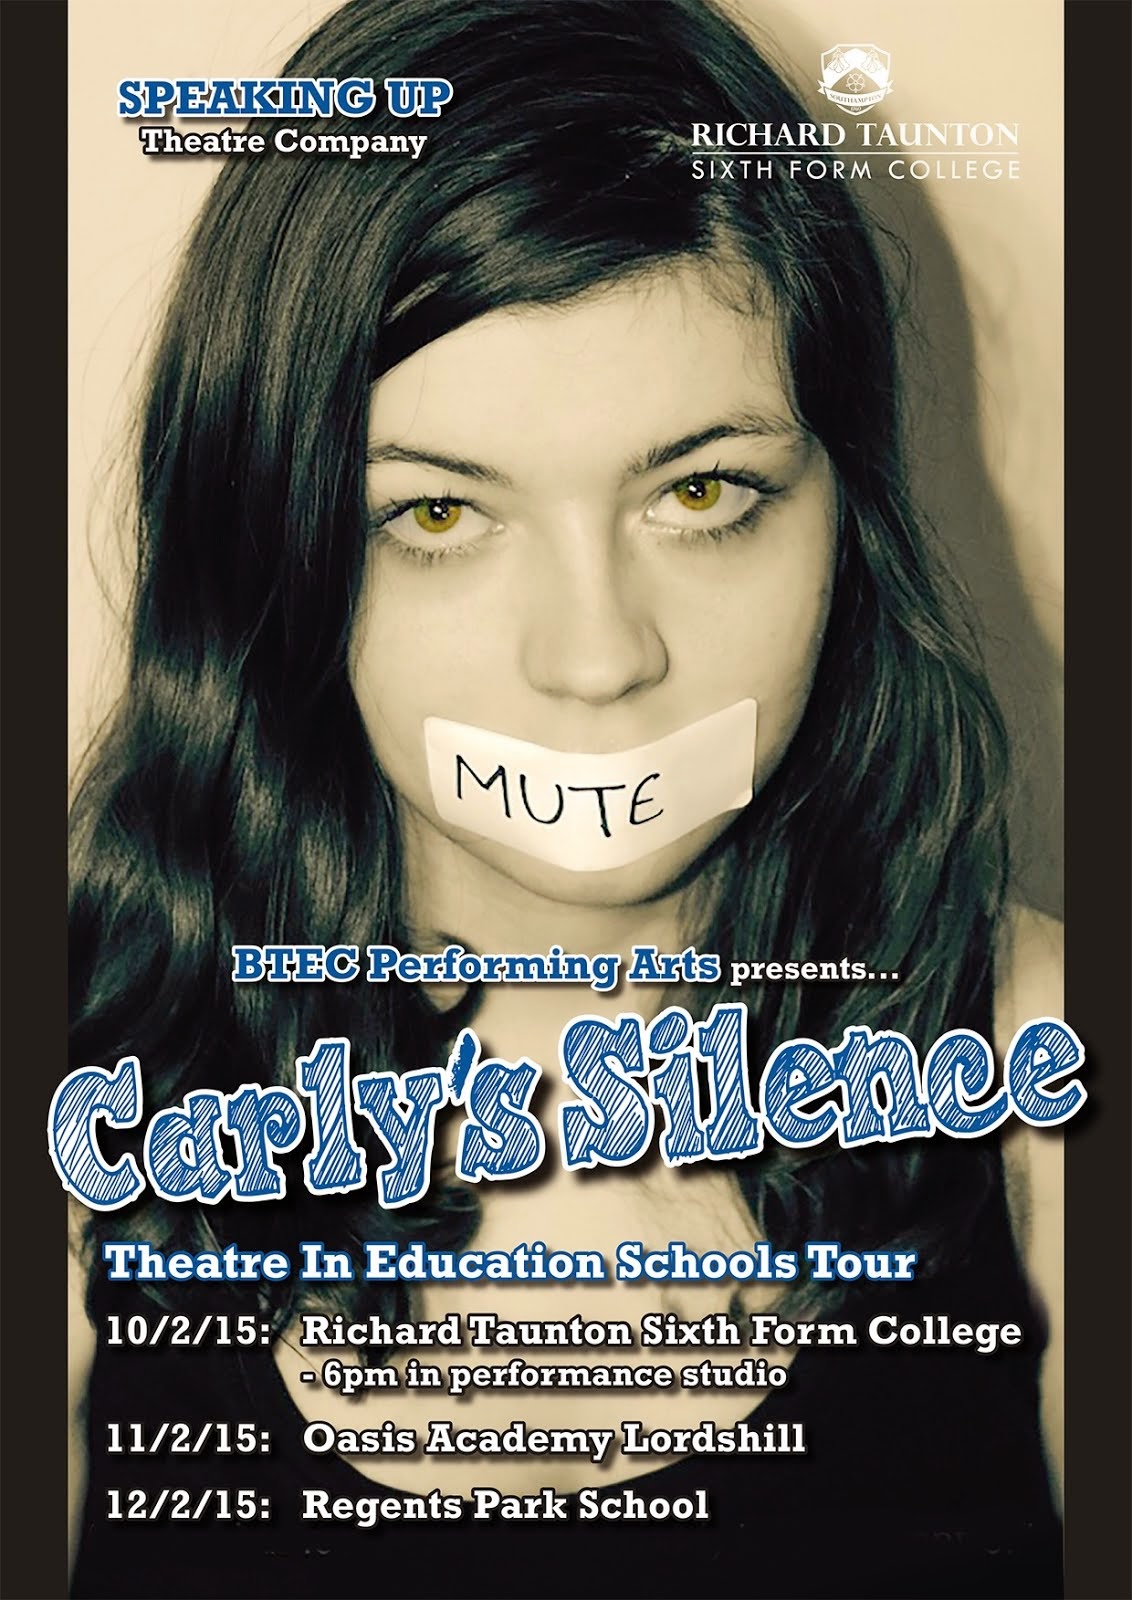 THEATRE IN EDUCATION SCHOOLS TOUR POSTER